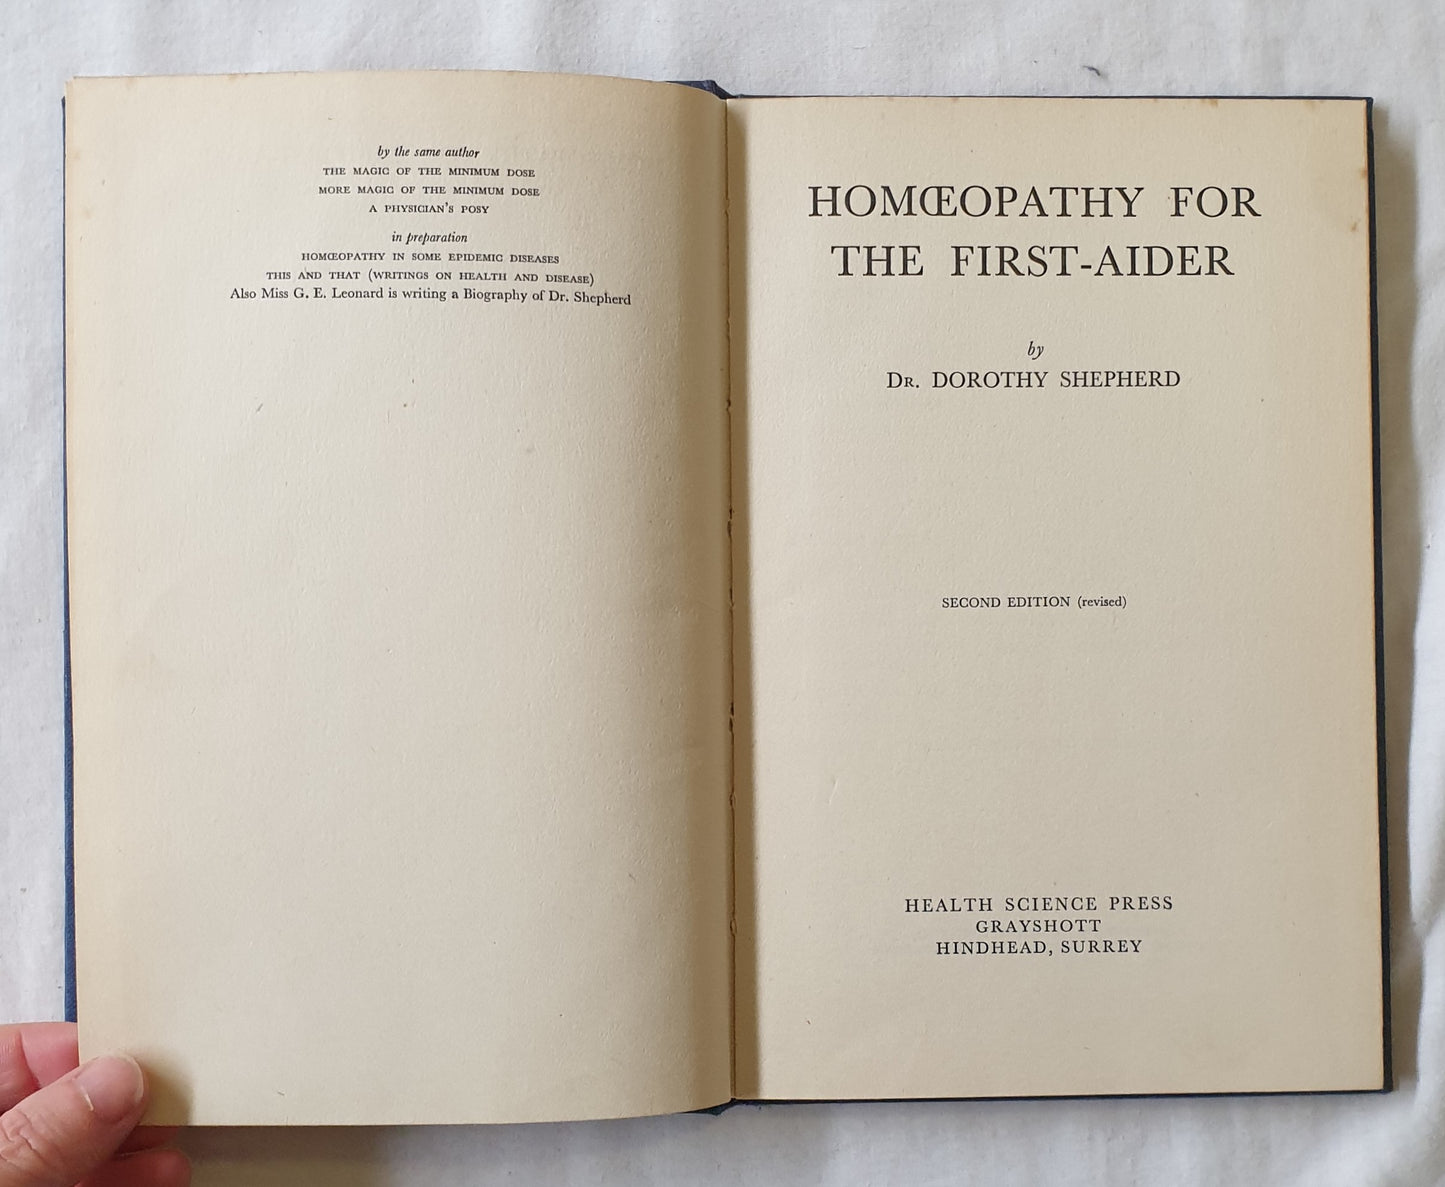 Homoeopathy for the First-Aider by Dorothy Shepherd